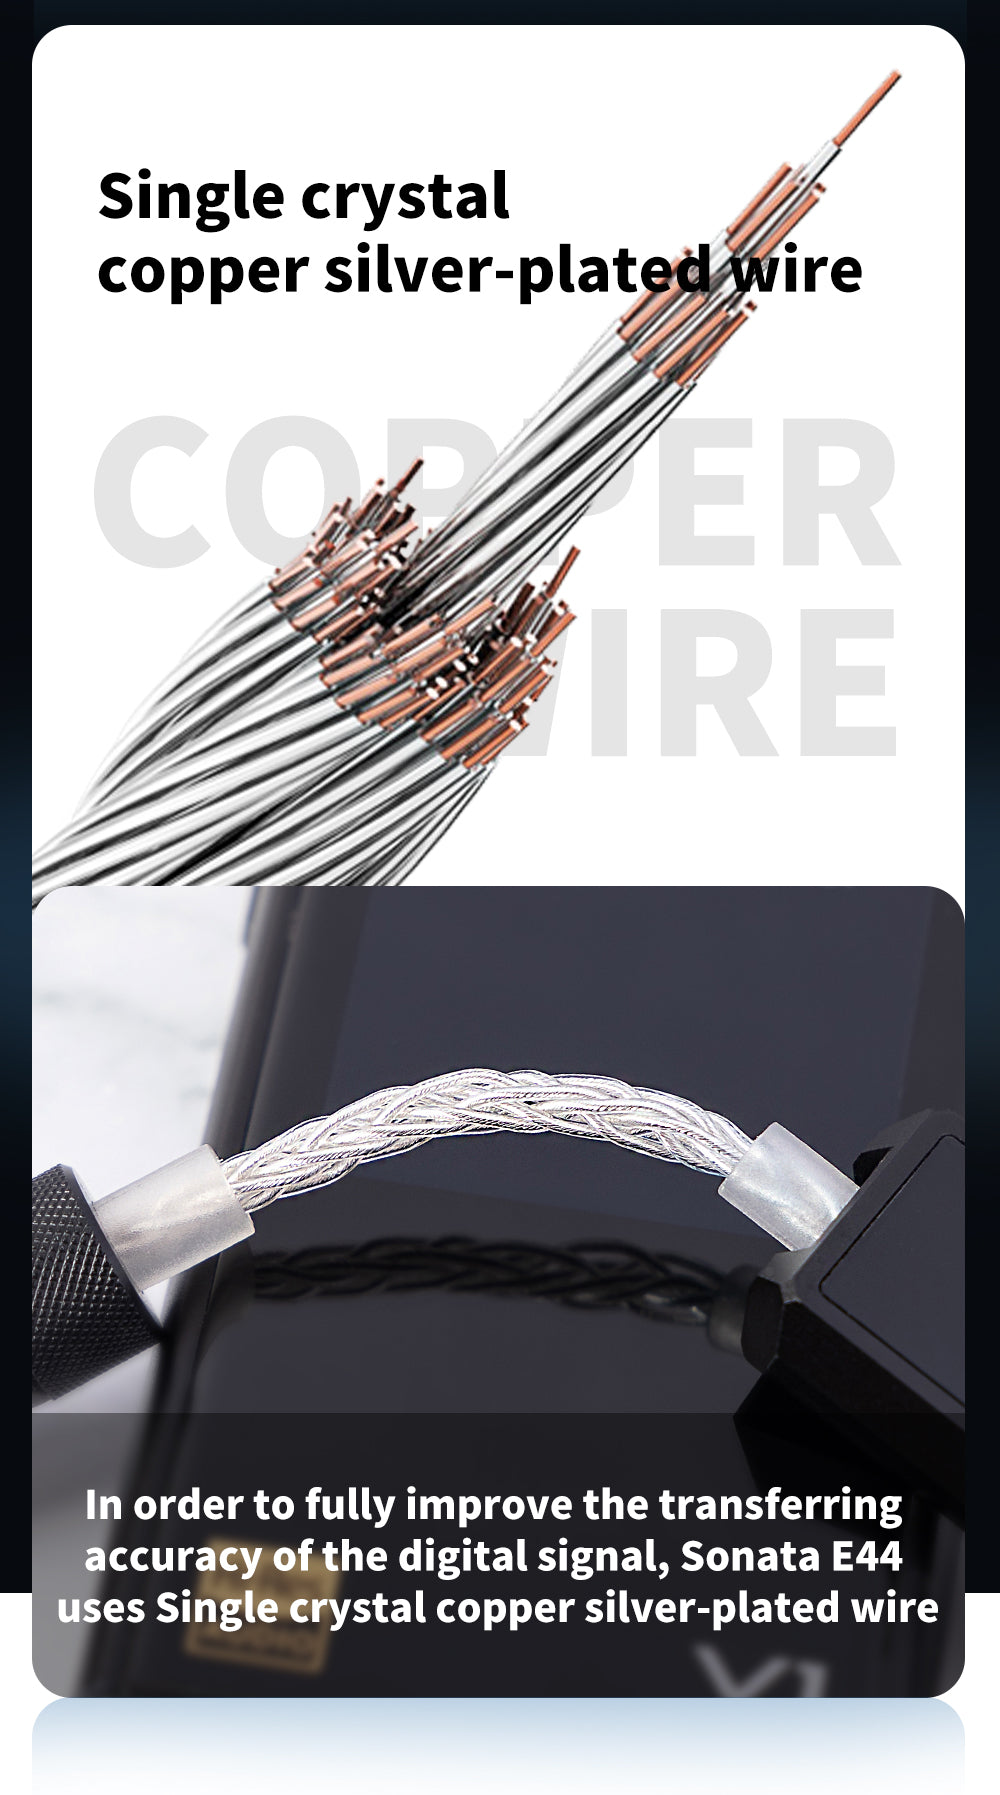 In order to fully improve the transferring accuracy of the digital signal, Sonata E44 uses Single crystal copper silver-plated wire